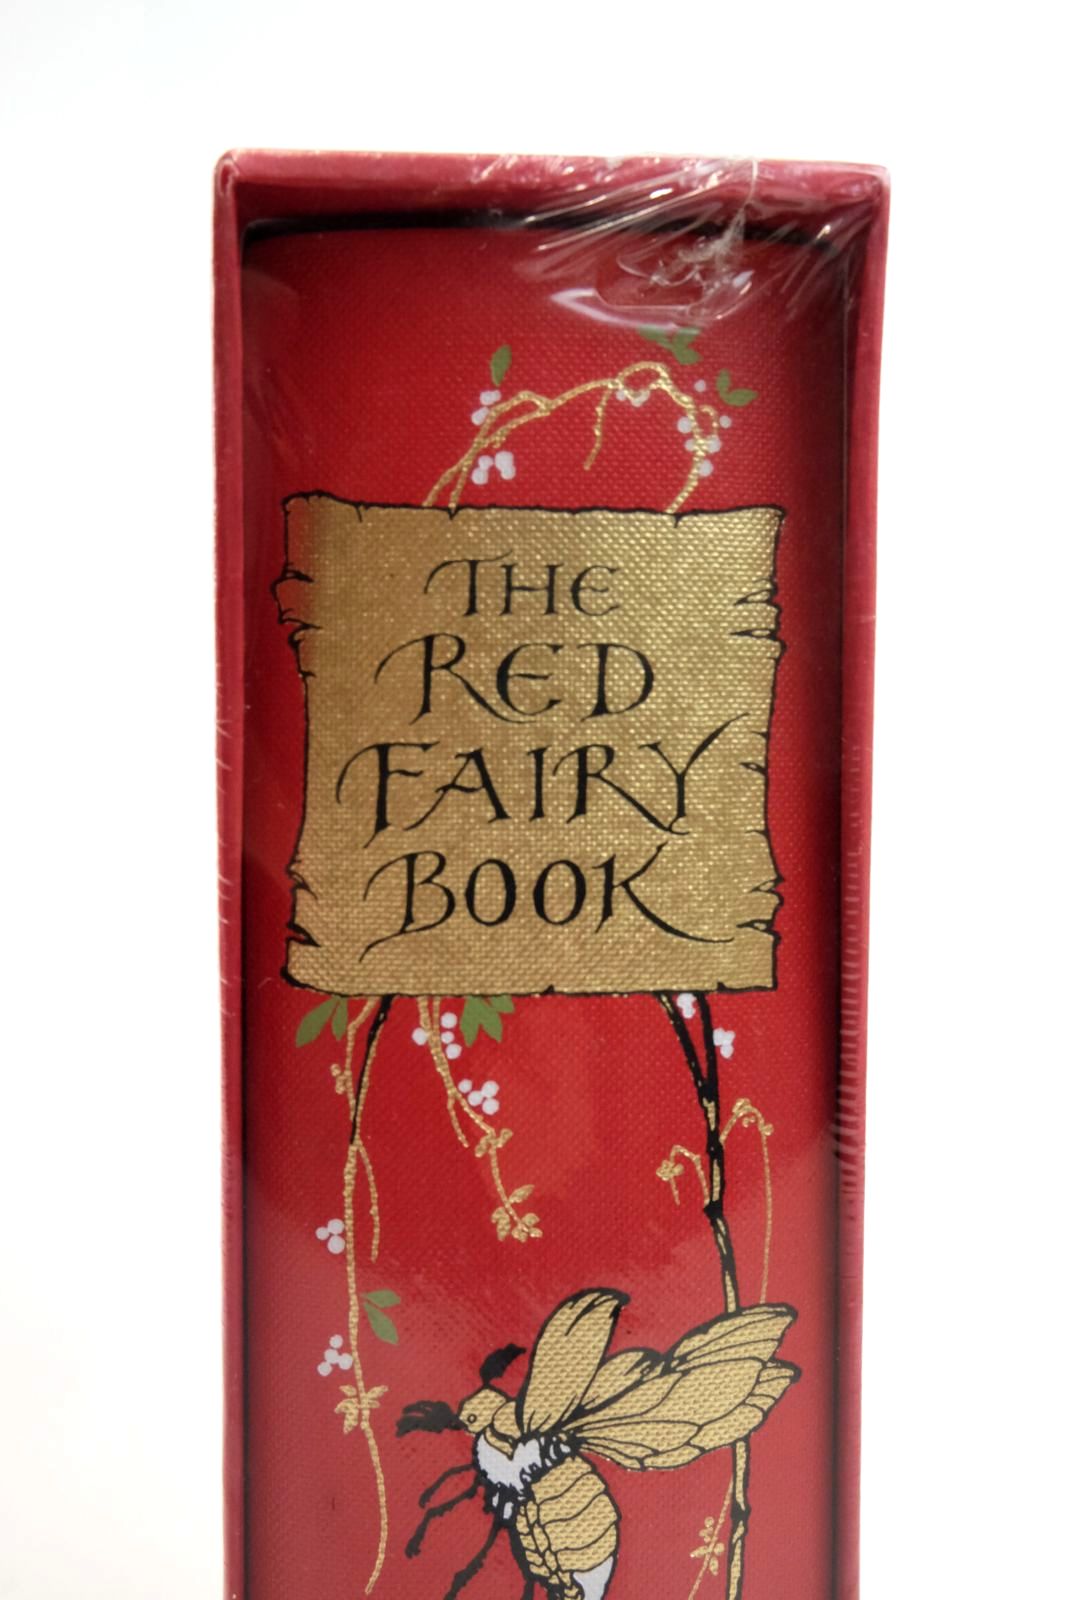 Photo of THE RED FAIRY BOOK written by Lang, Andrew illustrated by Puttapipat, Niroot published by Folio Society (STOCK CODE: 2137241)  for sale by Stella & Rose's Books